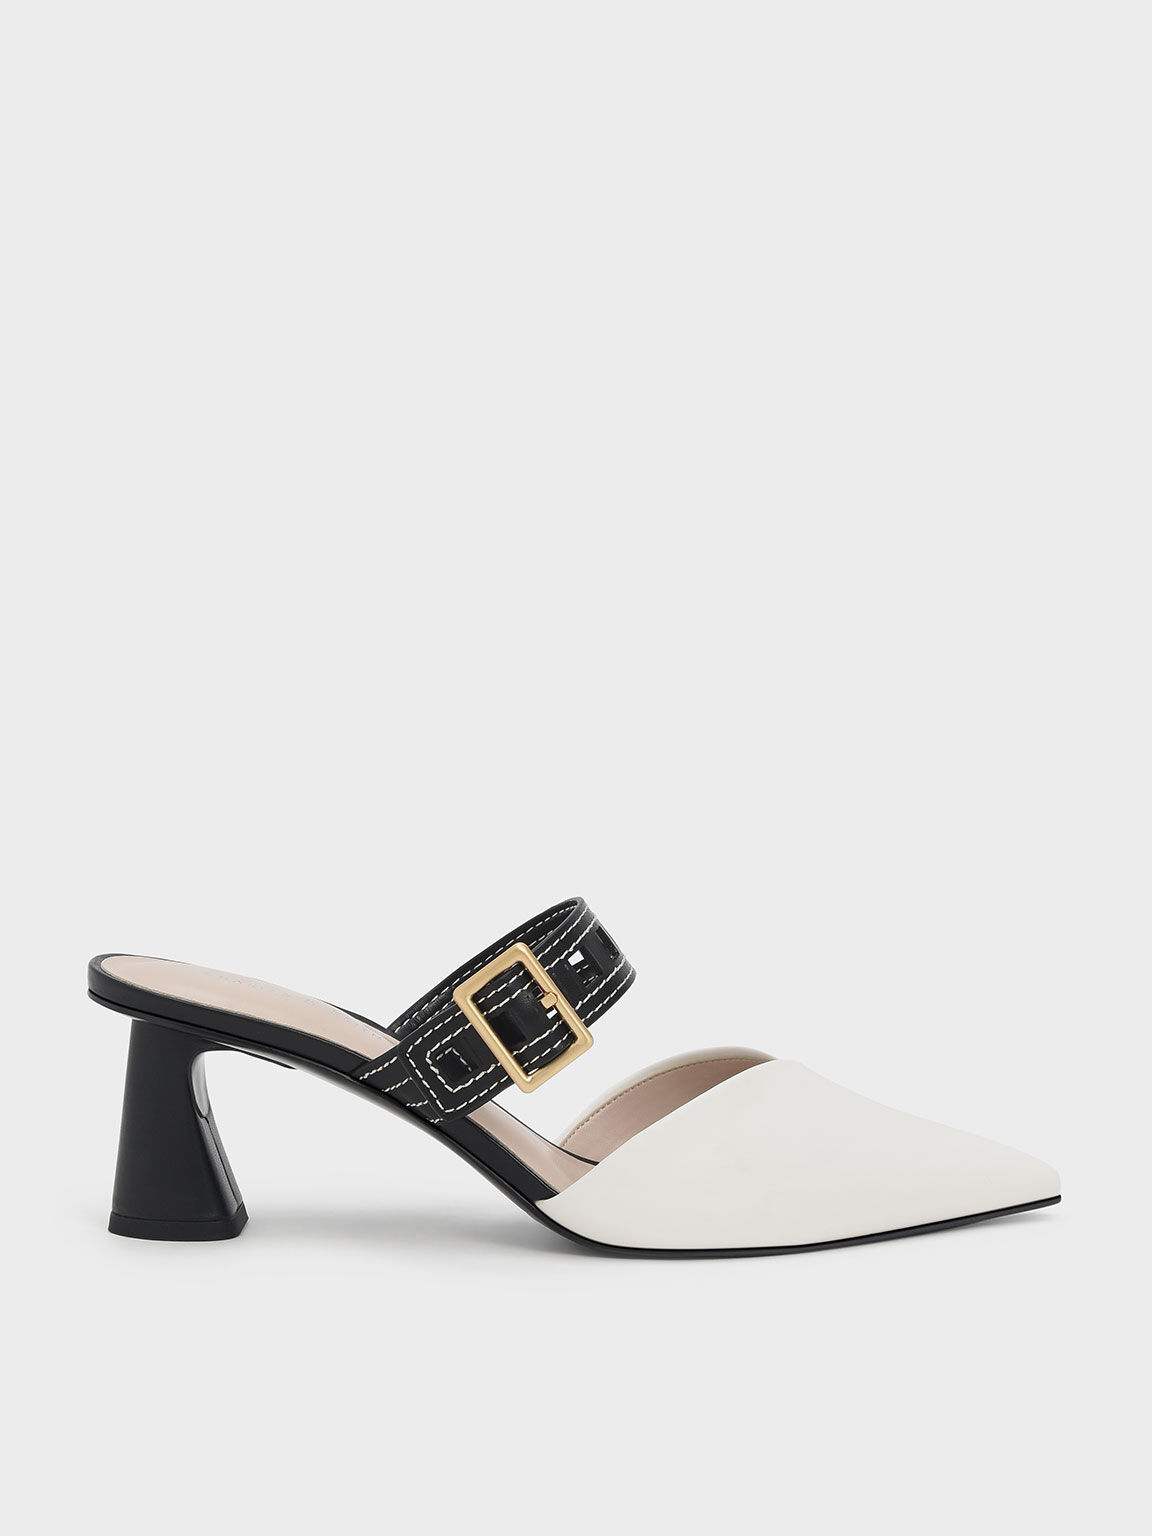 Brick Block Heel Ankle Strap Sandals | CHARLES & KEITH US | Buckled pumps,  Charles and keith shoes, Black pumps